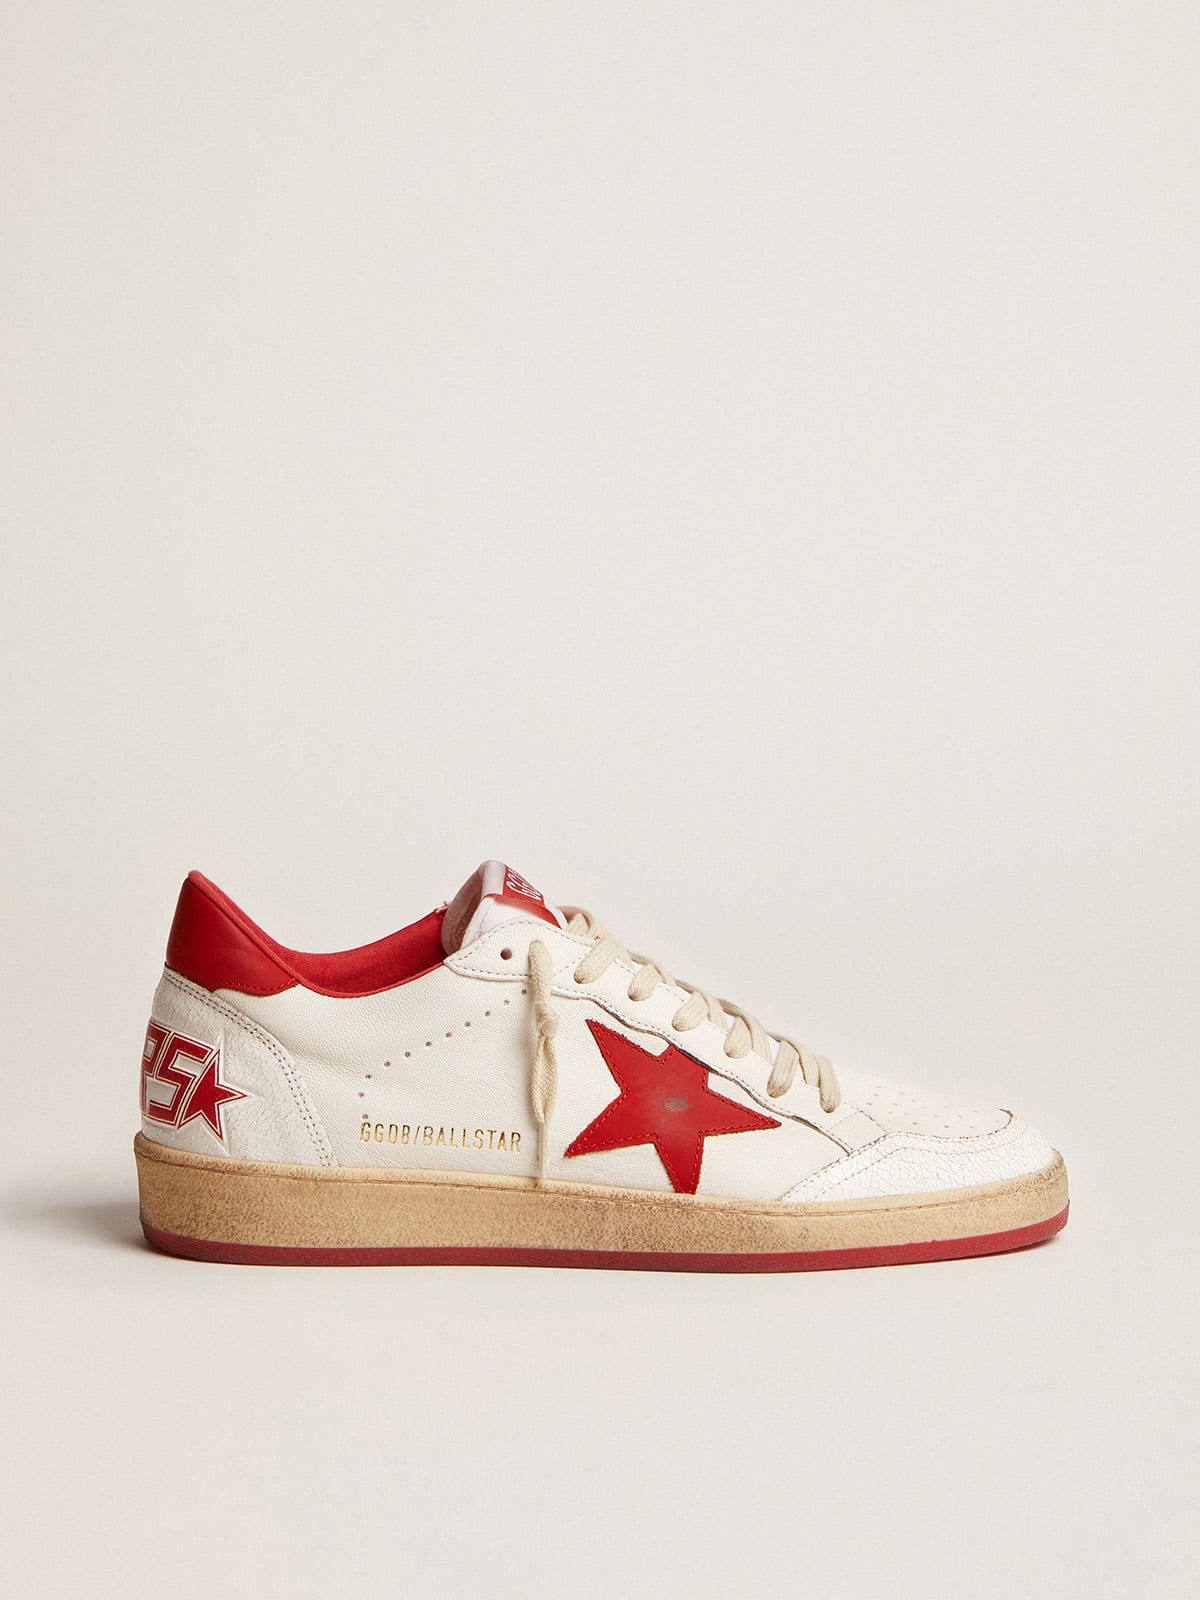 Men's Ball Star in white leather